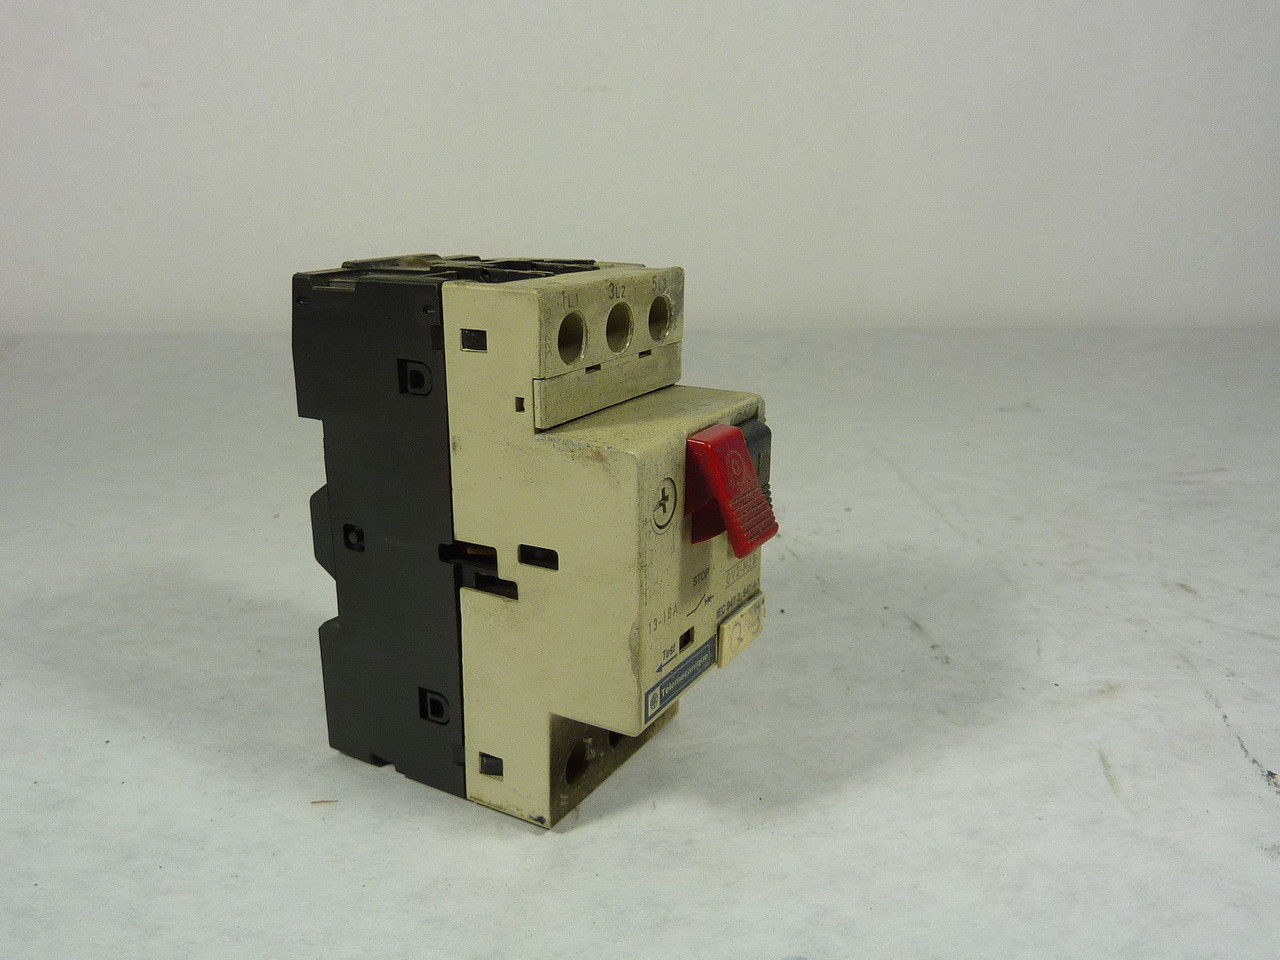 Telemecanique GV2-M20 Motor Starter Protector 13-18A USED